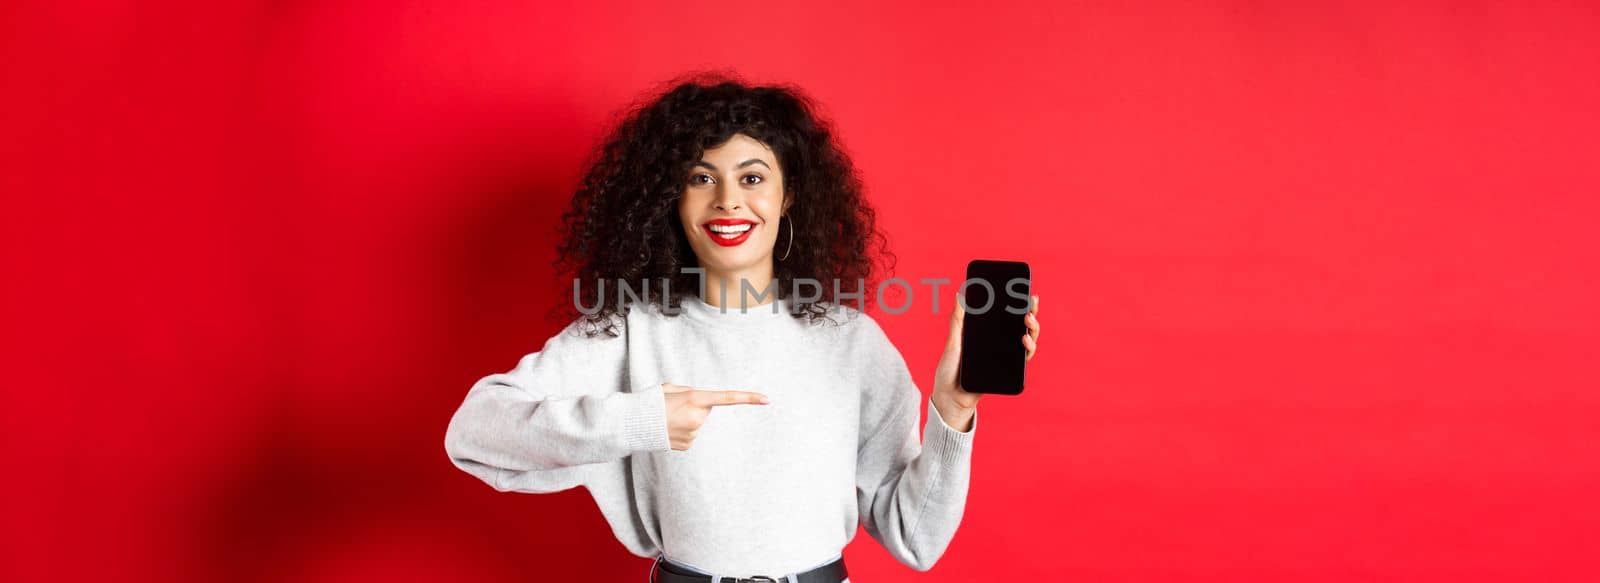 Beautiful female model showing empty smartphone screen, pointing at phone display and smiling, standing against red background.